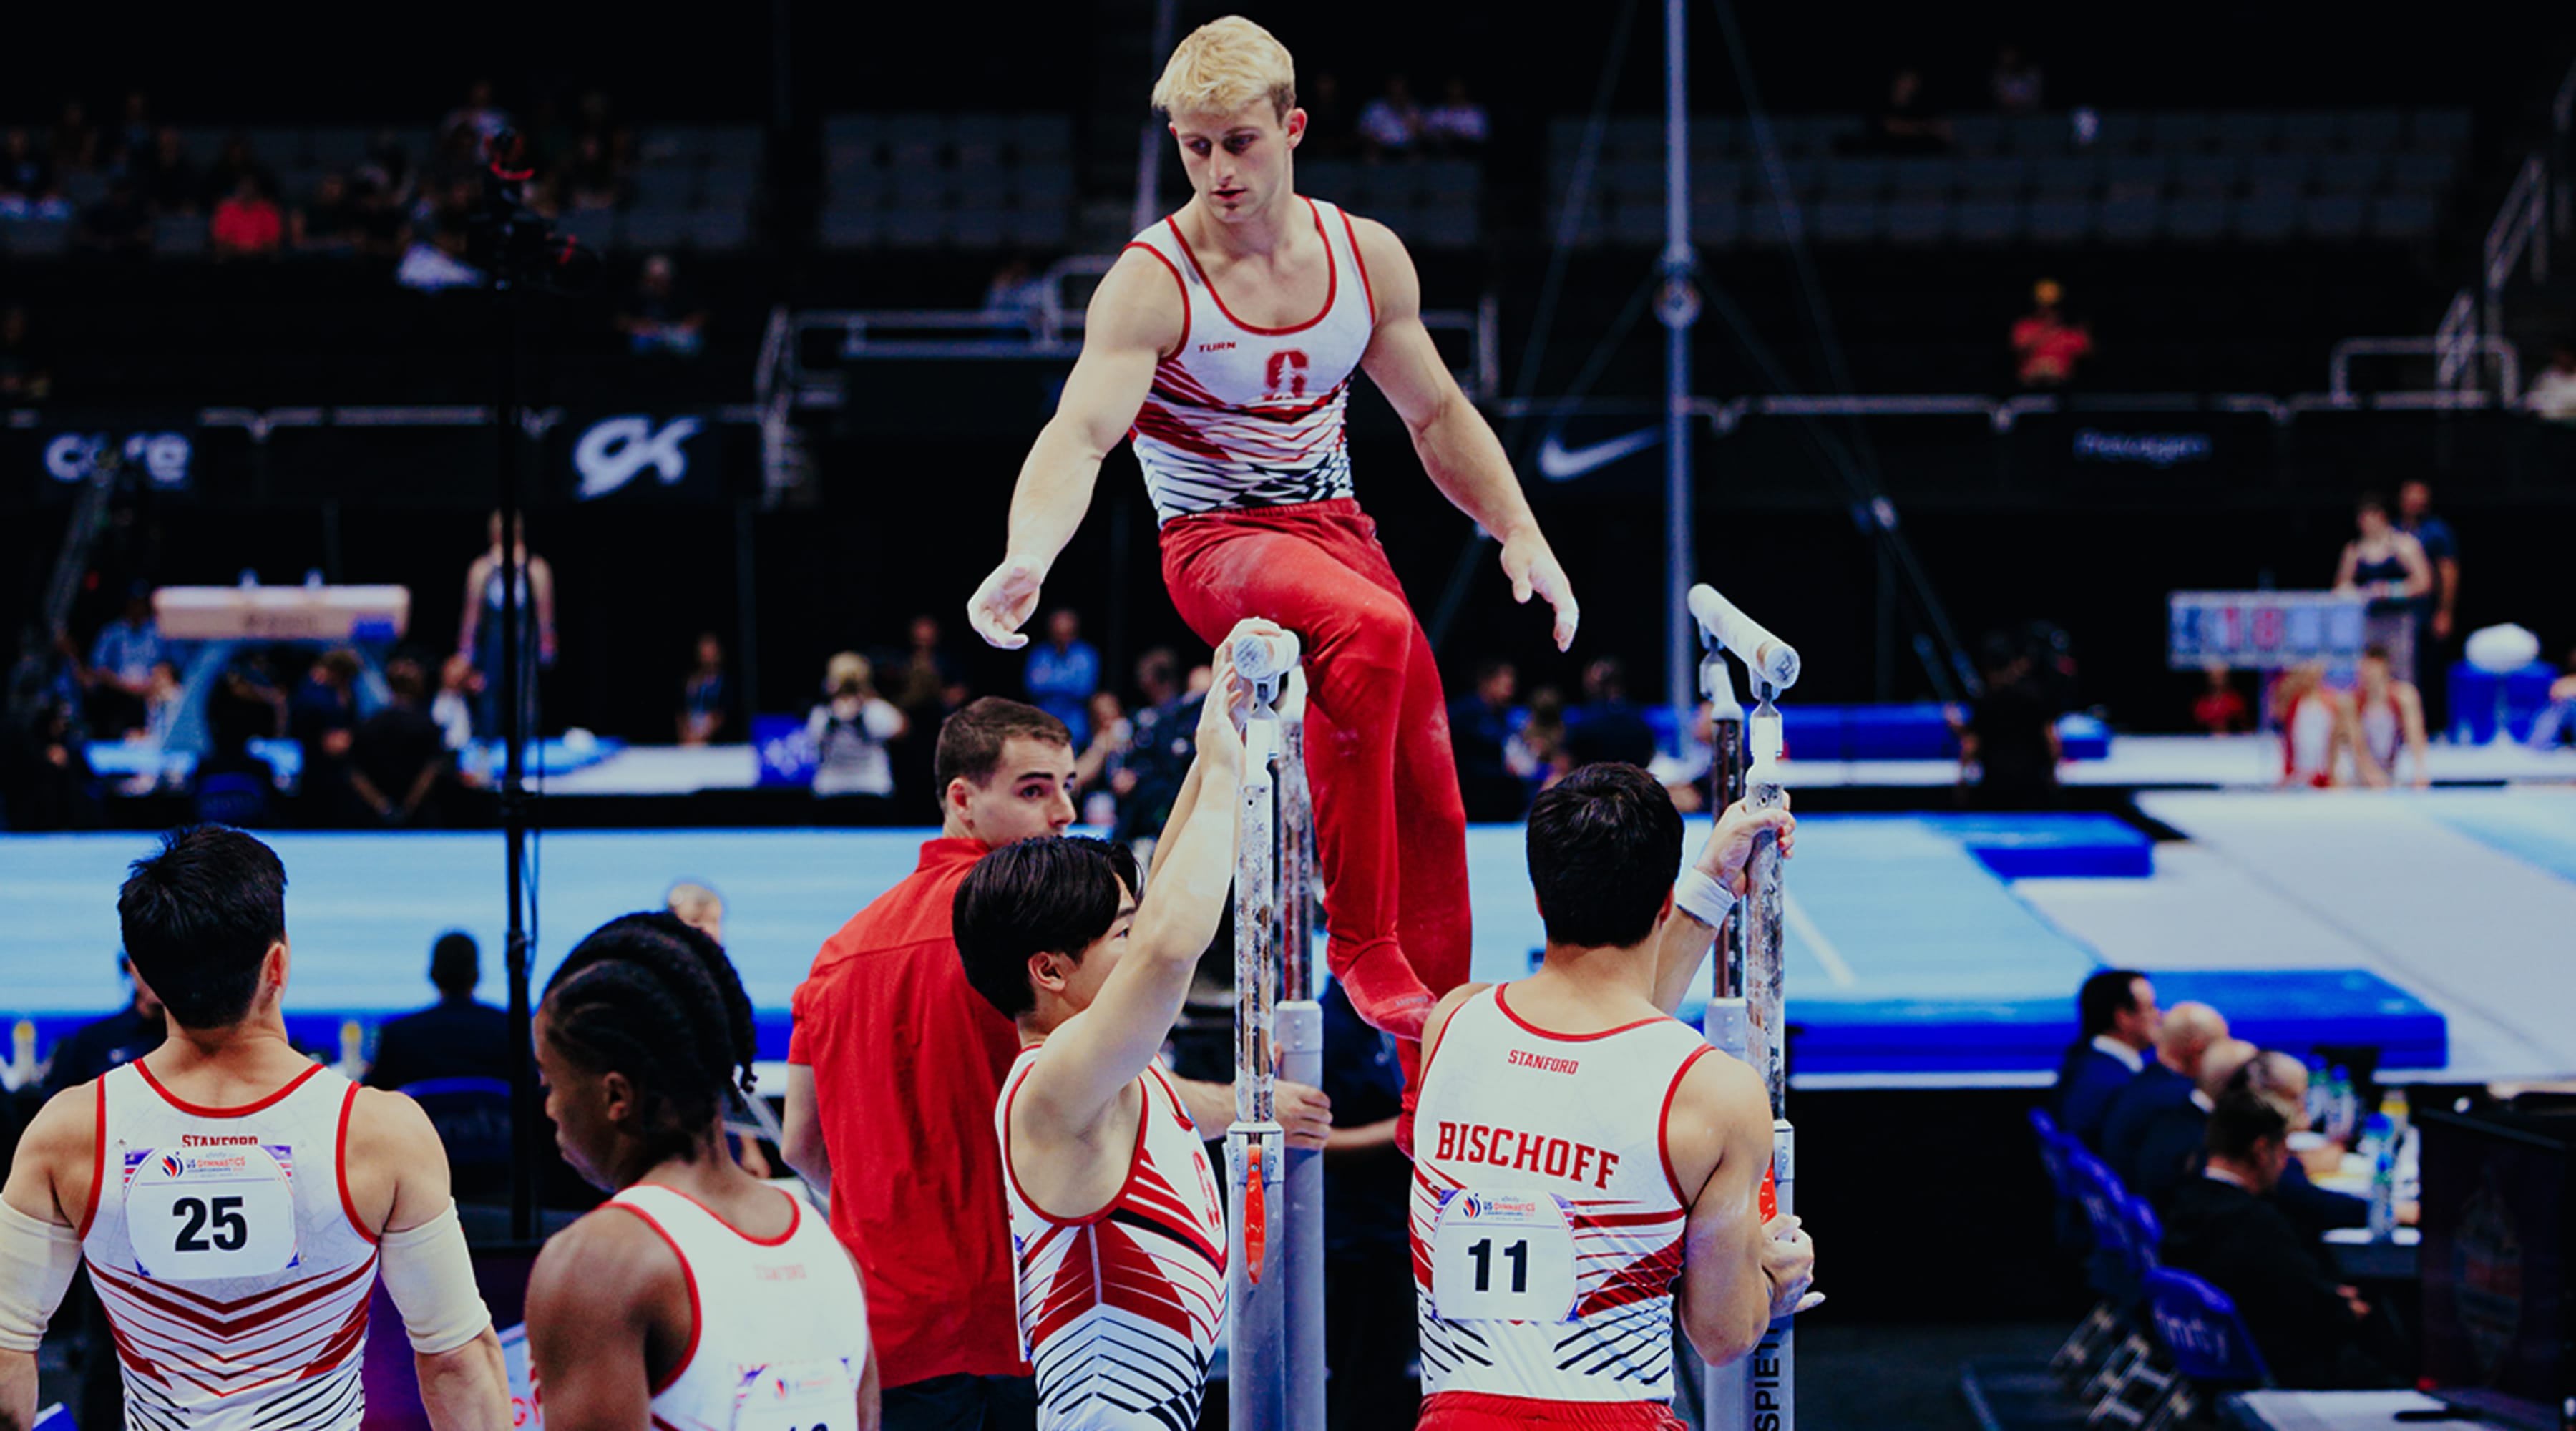 Stanford Mens Gymnastics team prepares the parallel bars for competition at the US Gymnastics Nationals 2023 in San Jose, California.